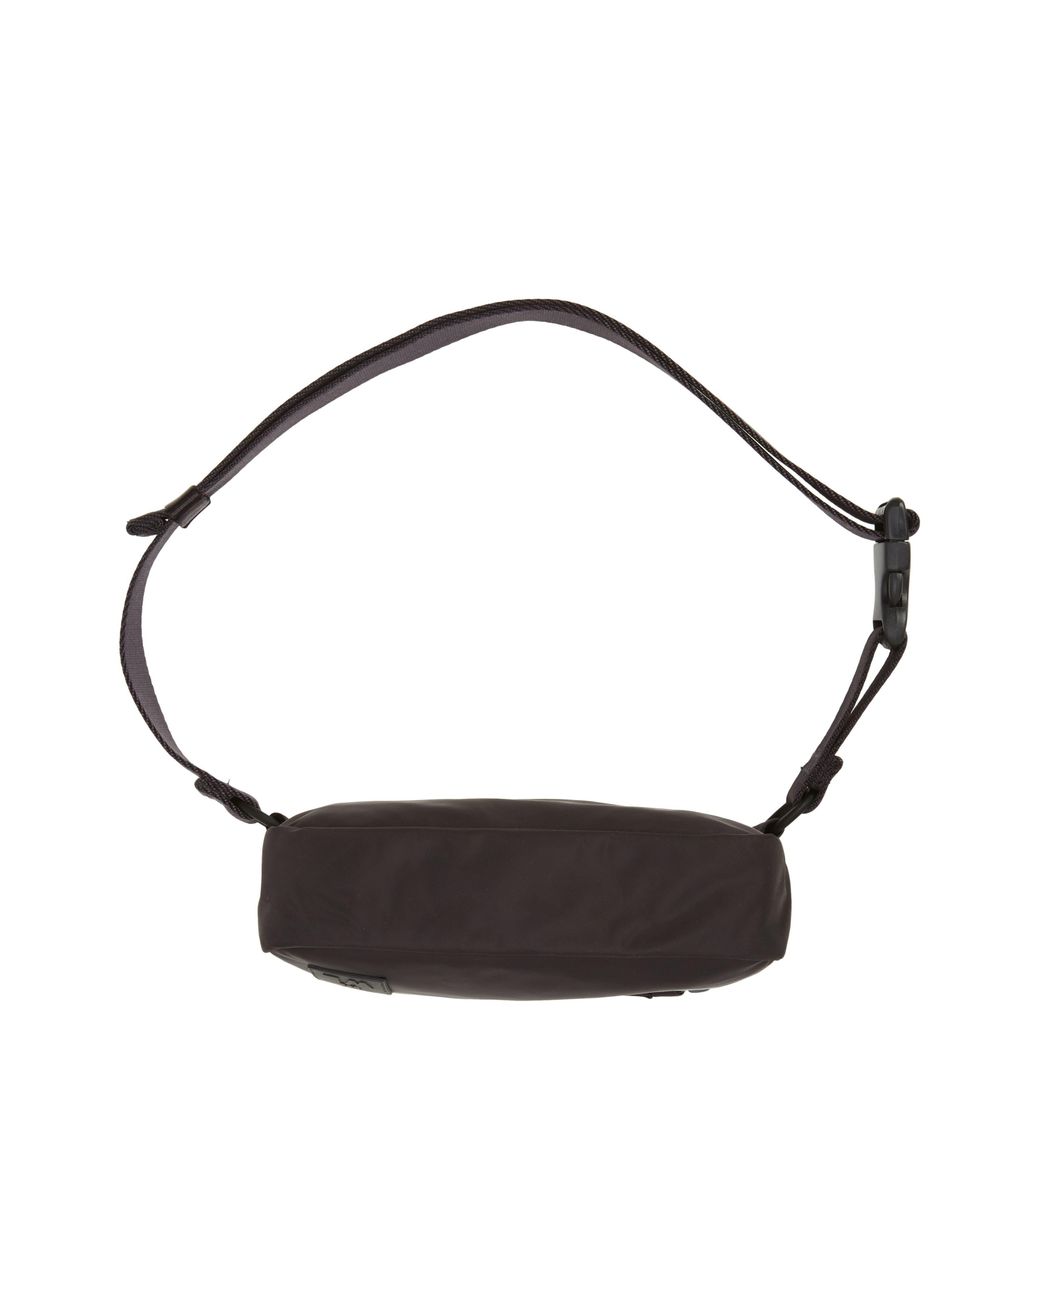 Madewell The Resourced Convertible Belt Bag In Black Lyst, 43% OFF